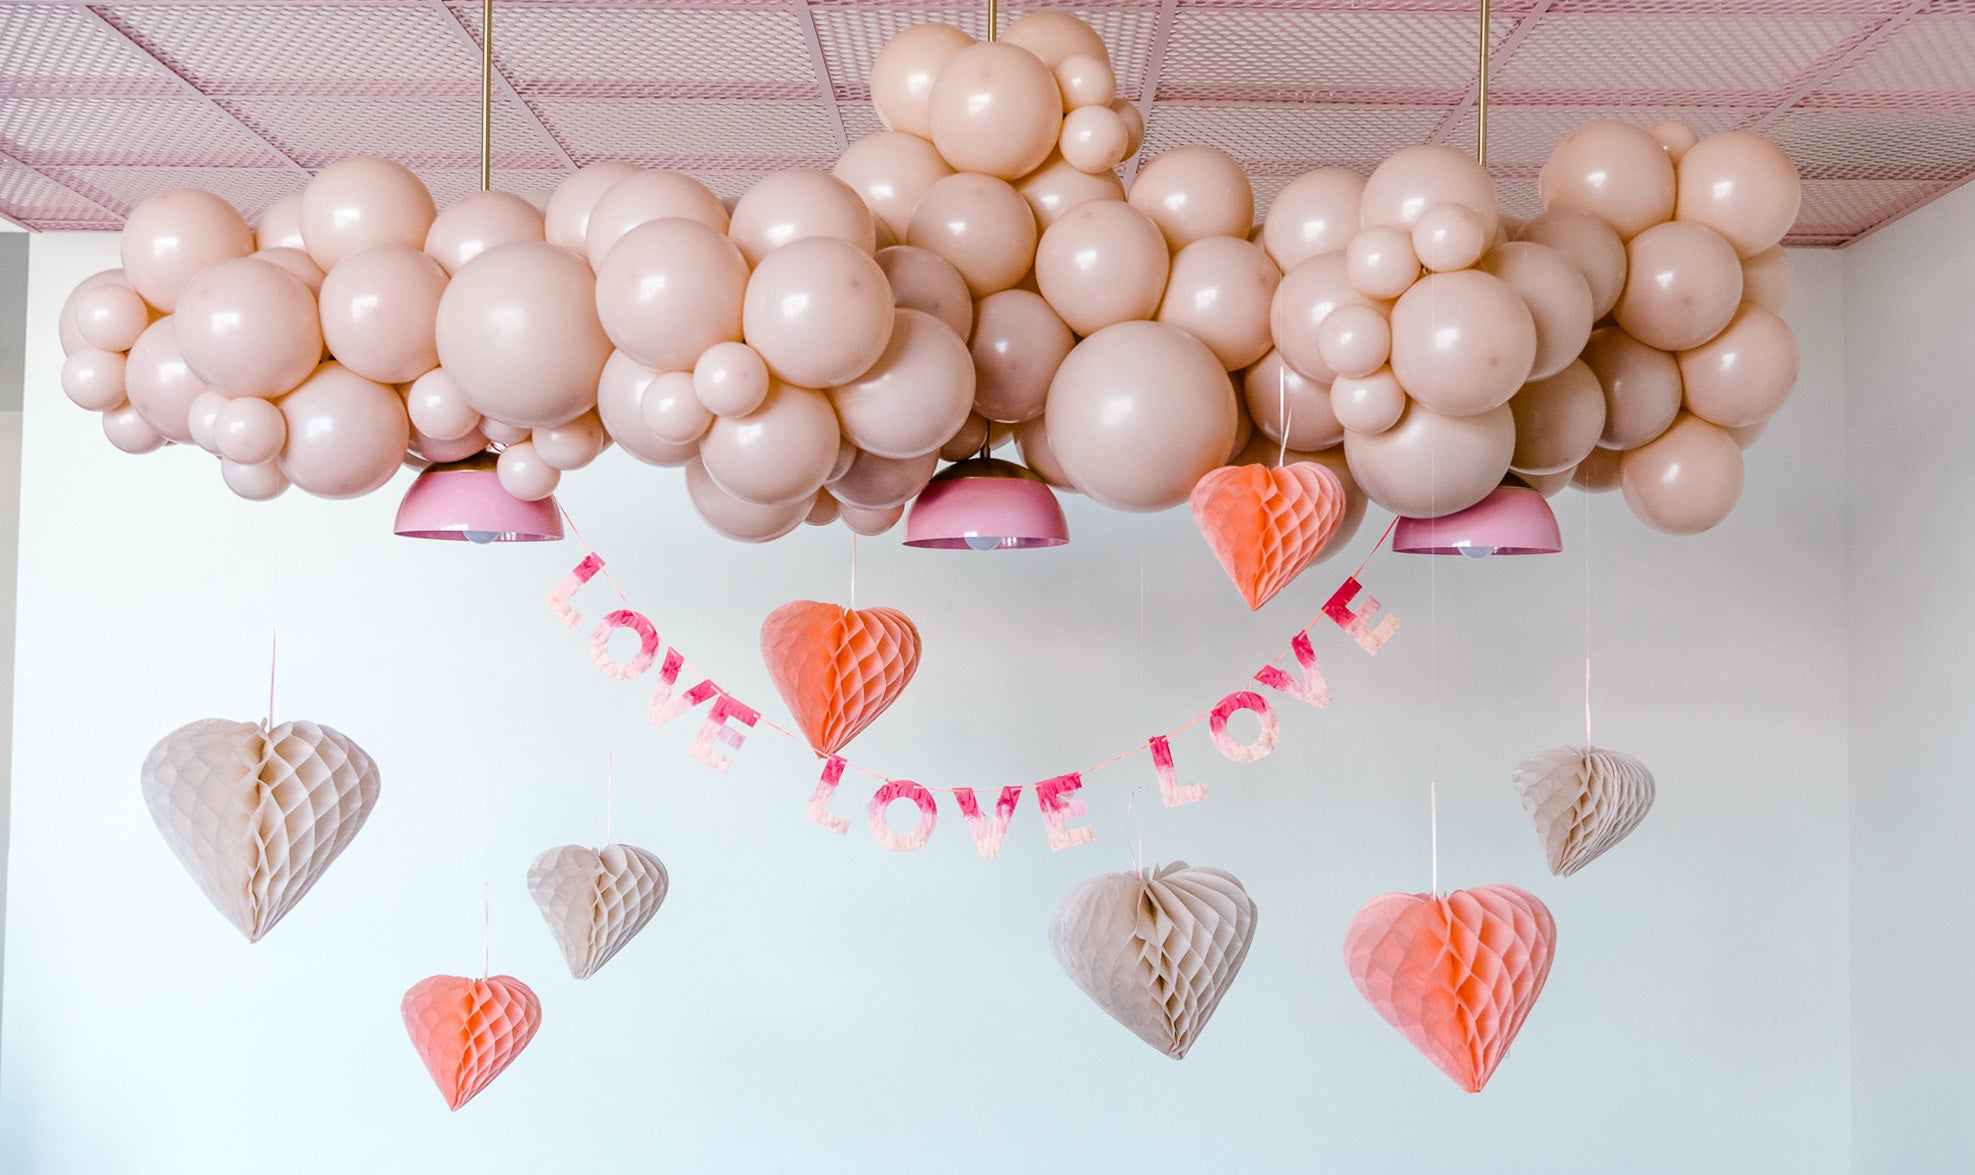 Honeycomb heart-shaped decorations with a balloon garland for Valentine's Day.